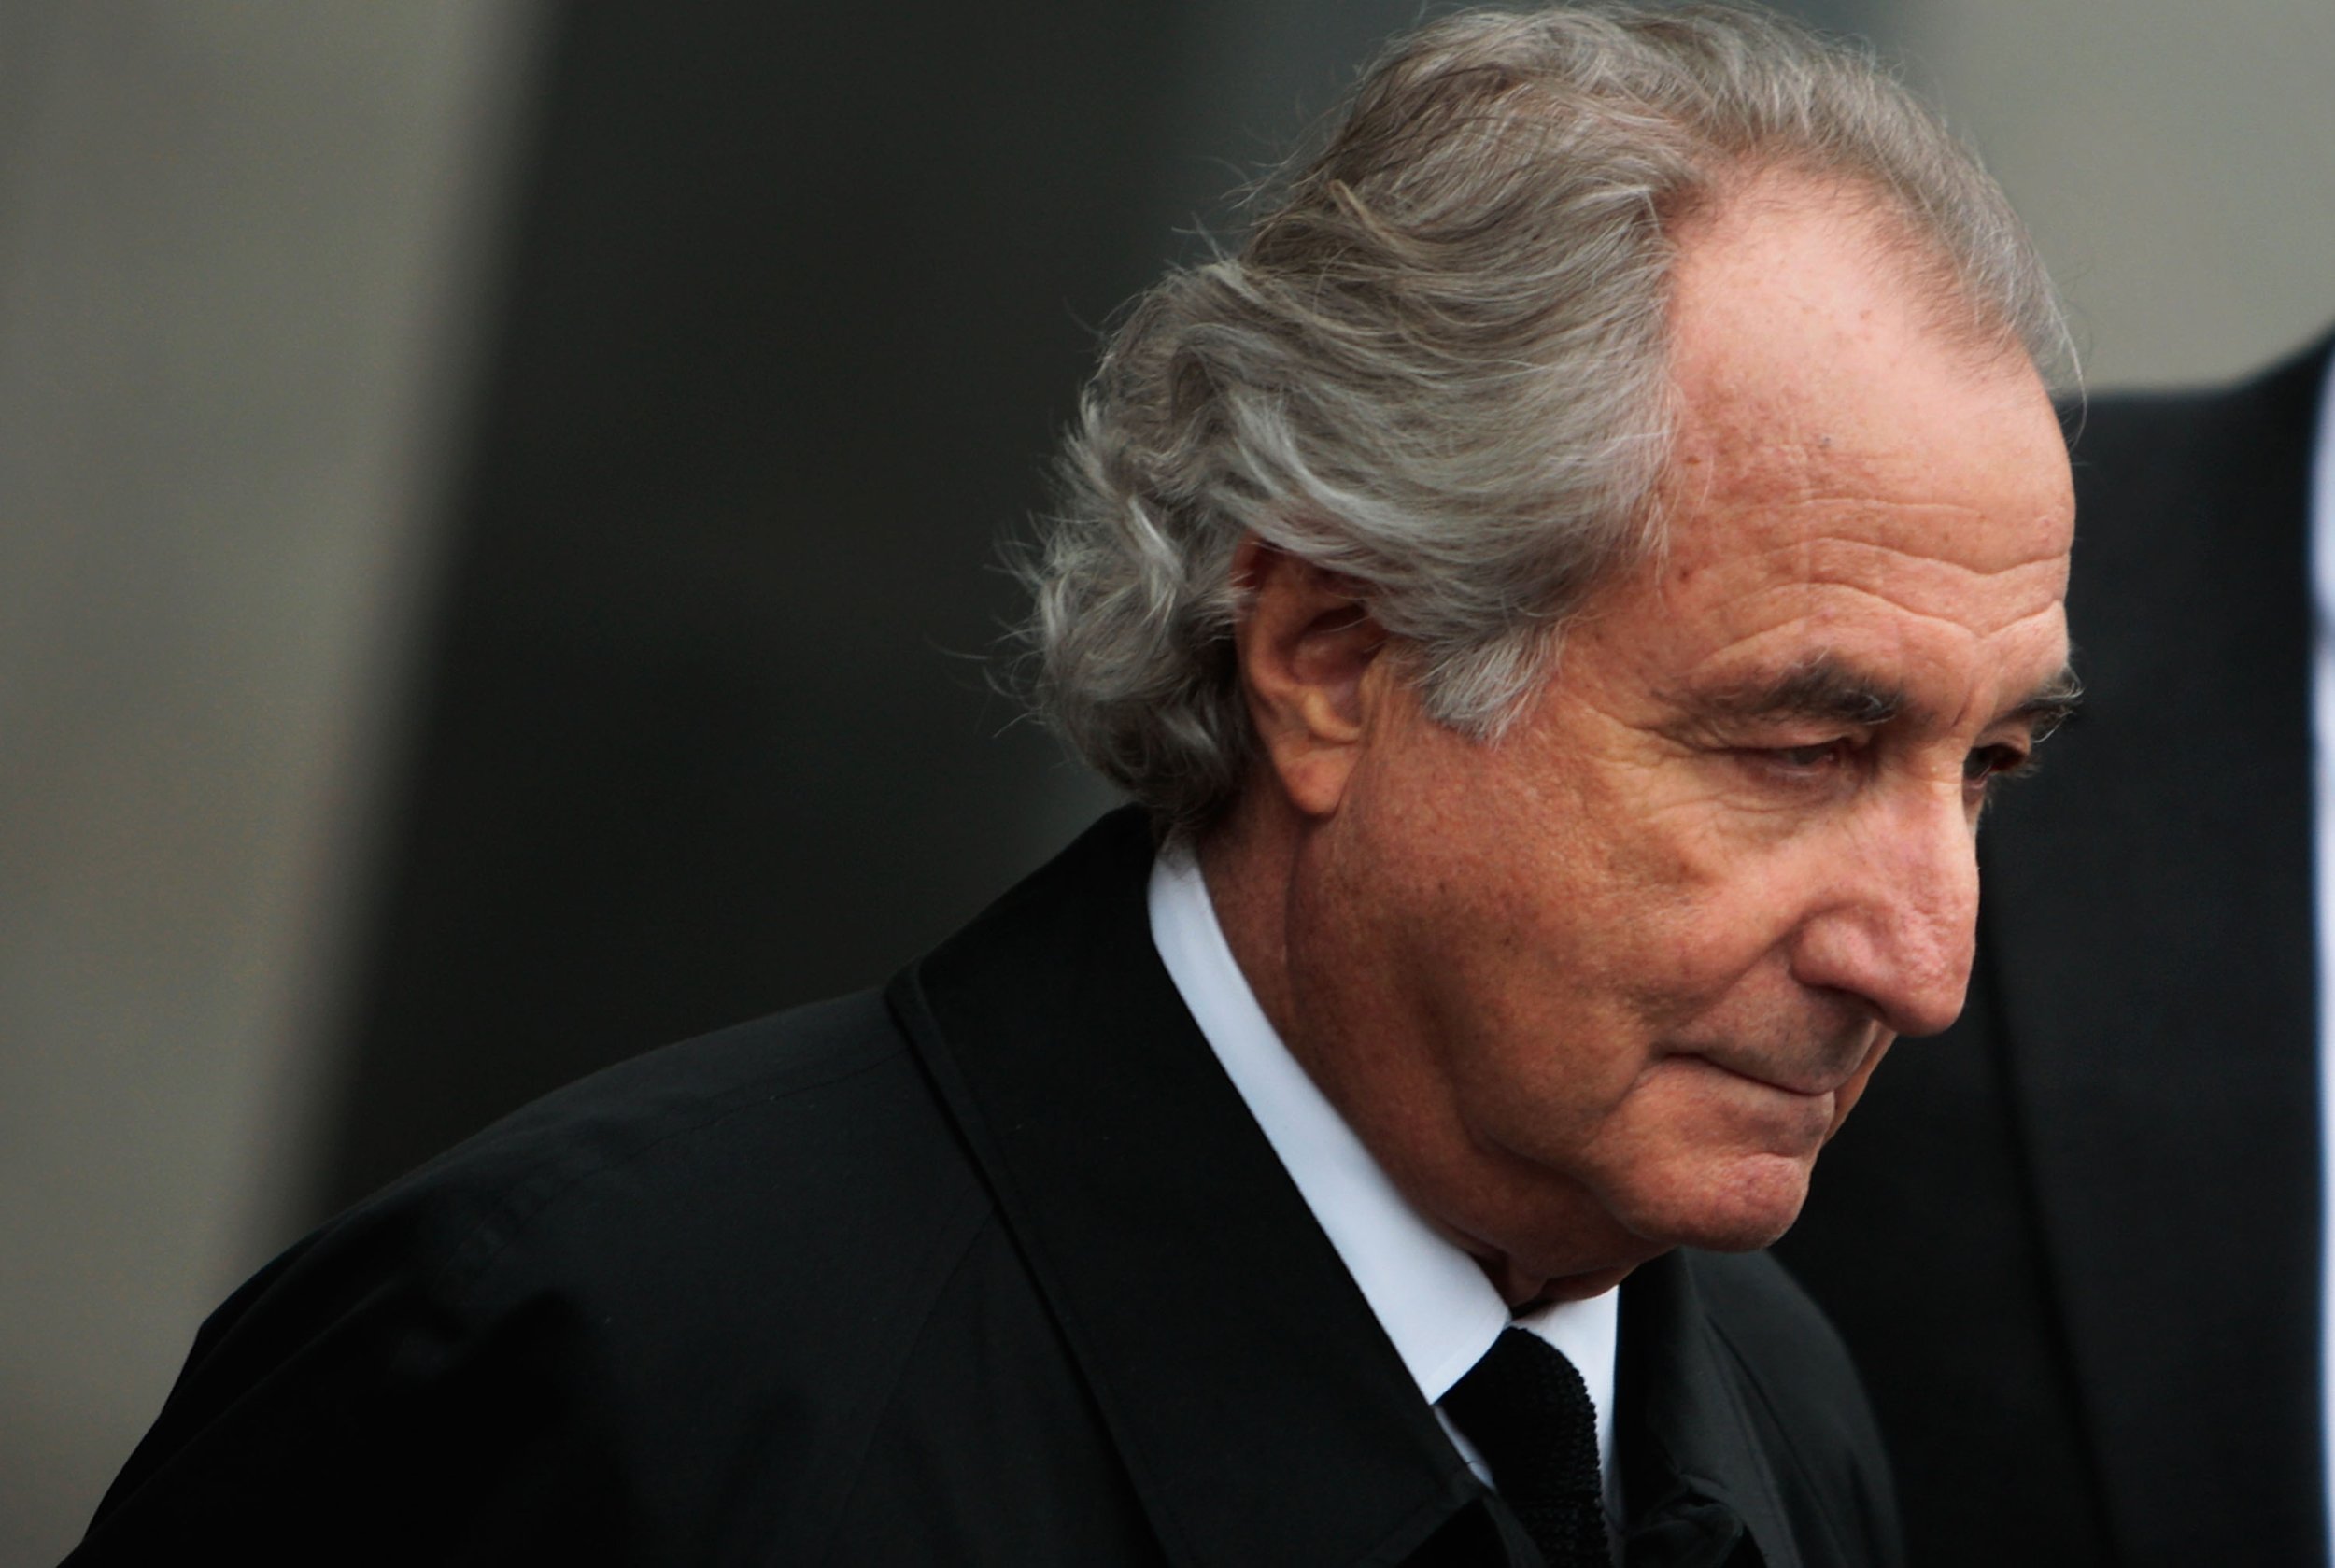 Bernie Madoff Aides Face Up To 20 Years In Prison For Roles In Ponzi